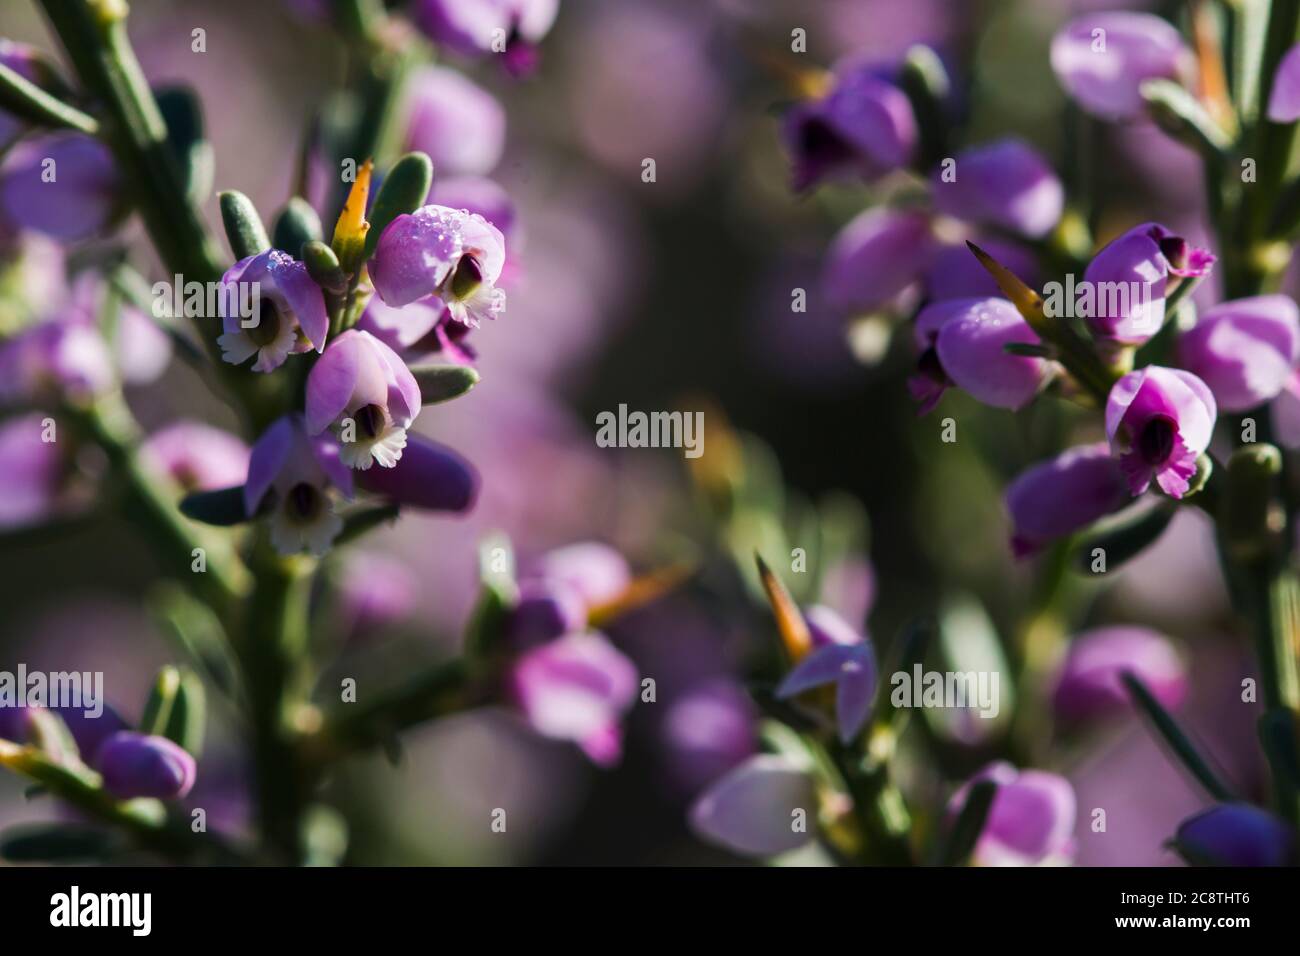 Details of the small, dainty flowers of the Nylandtia Spinoza fynbos plant Stock Photo